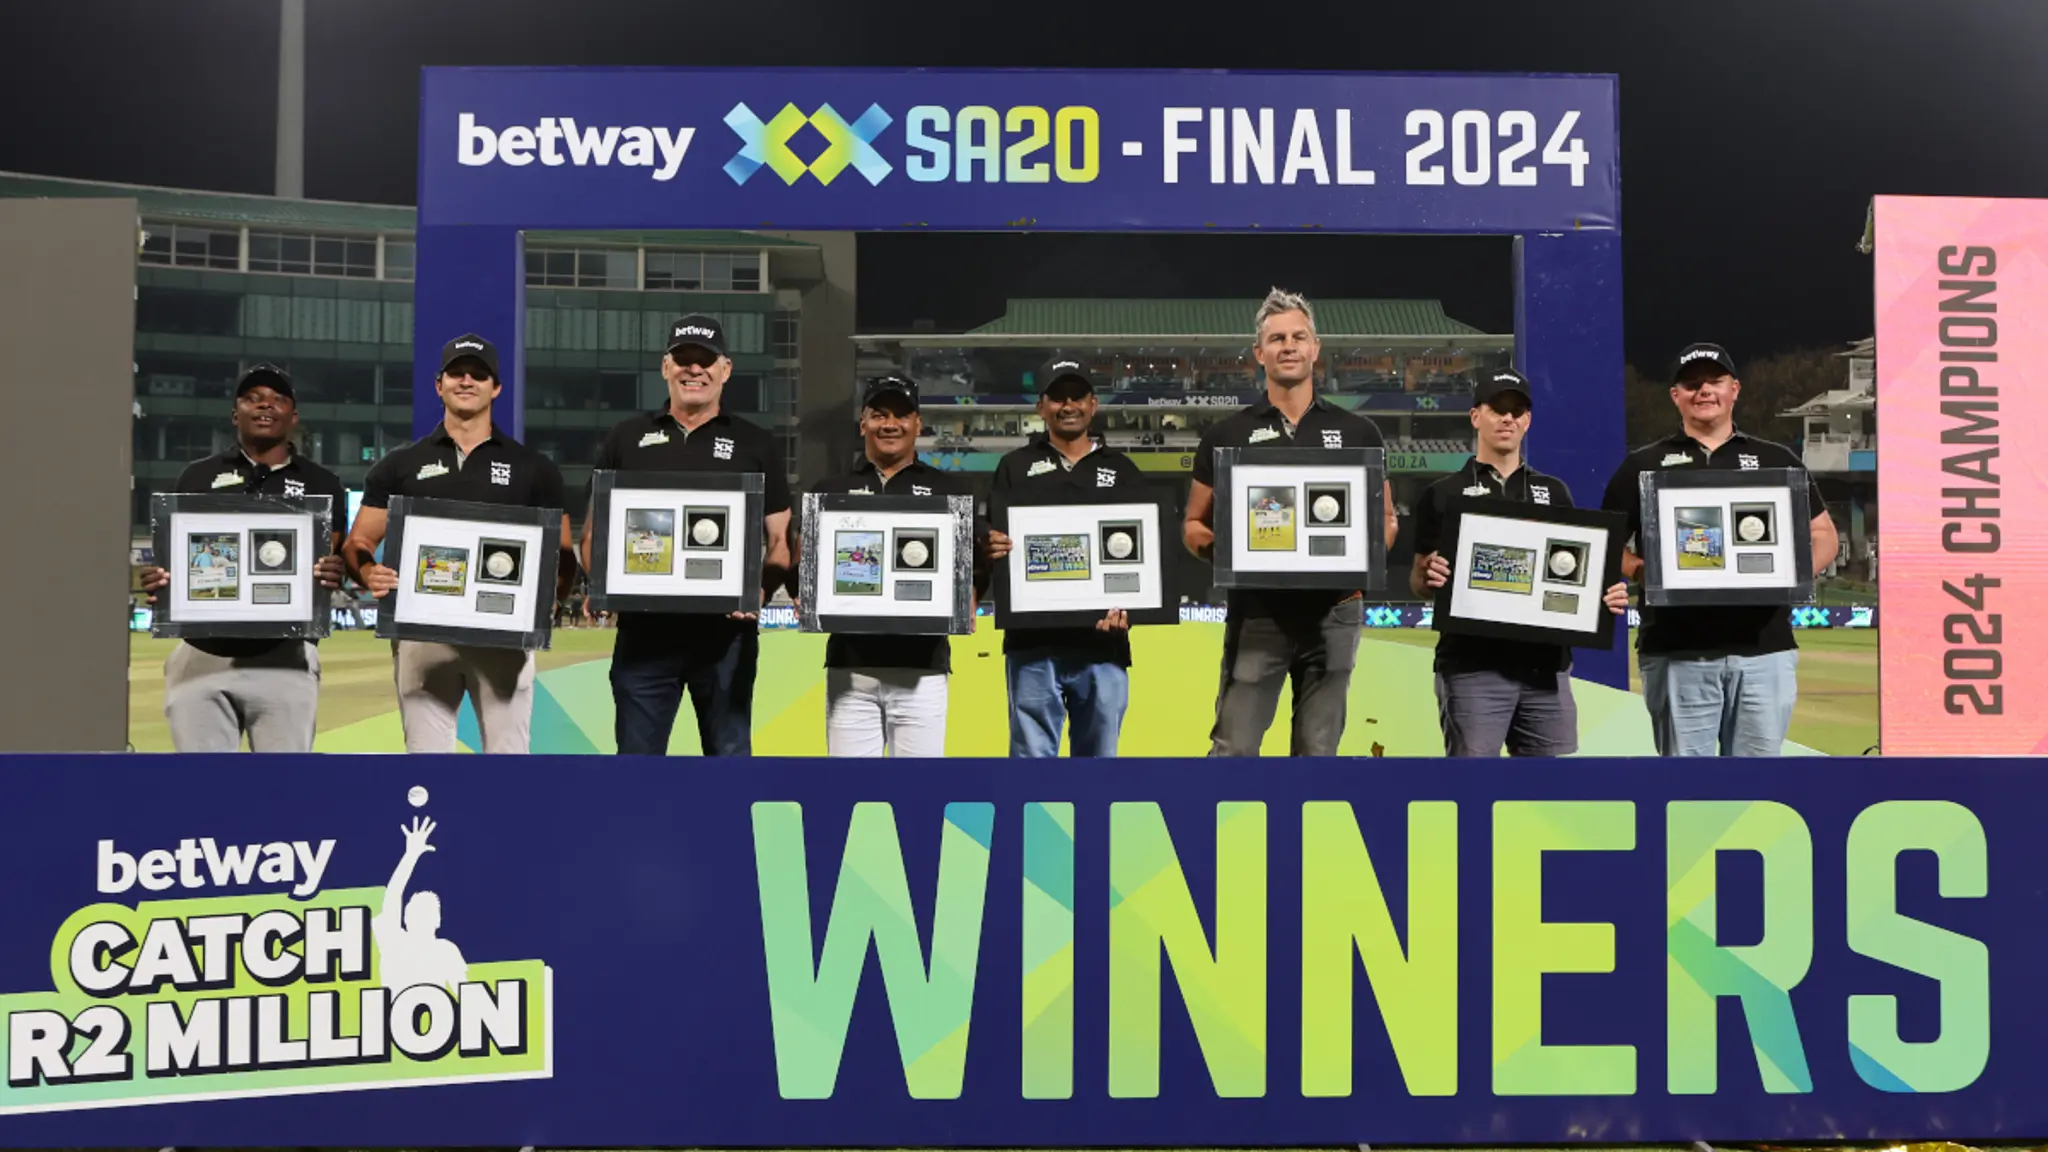 Betway Catch 2 Million - Every magic moment SA20